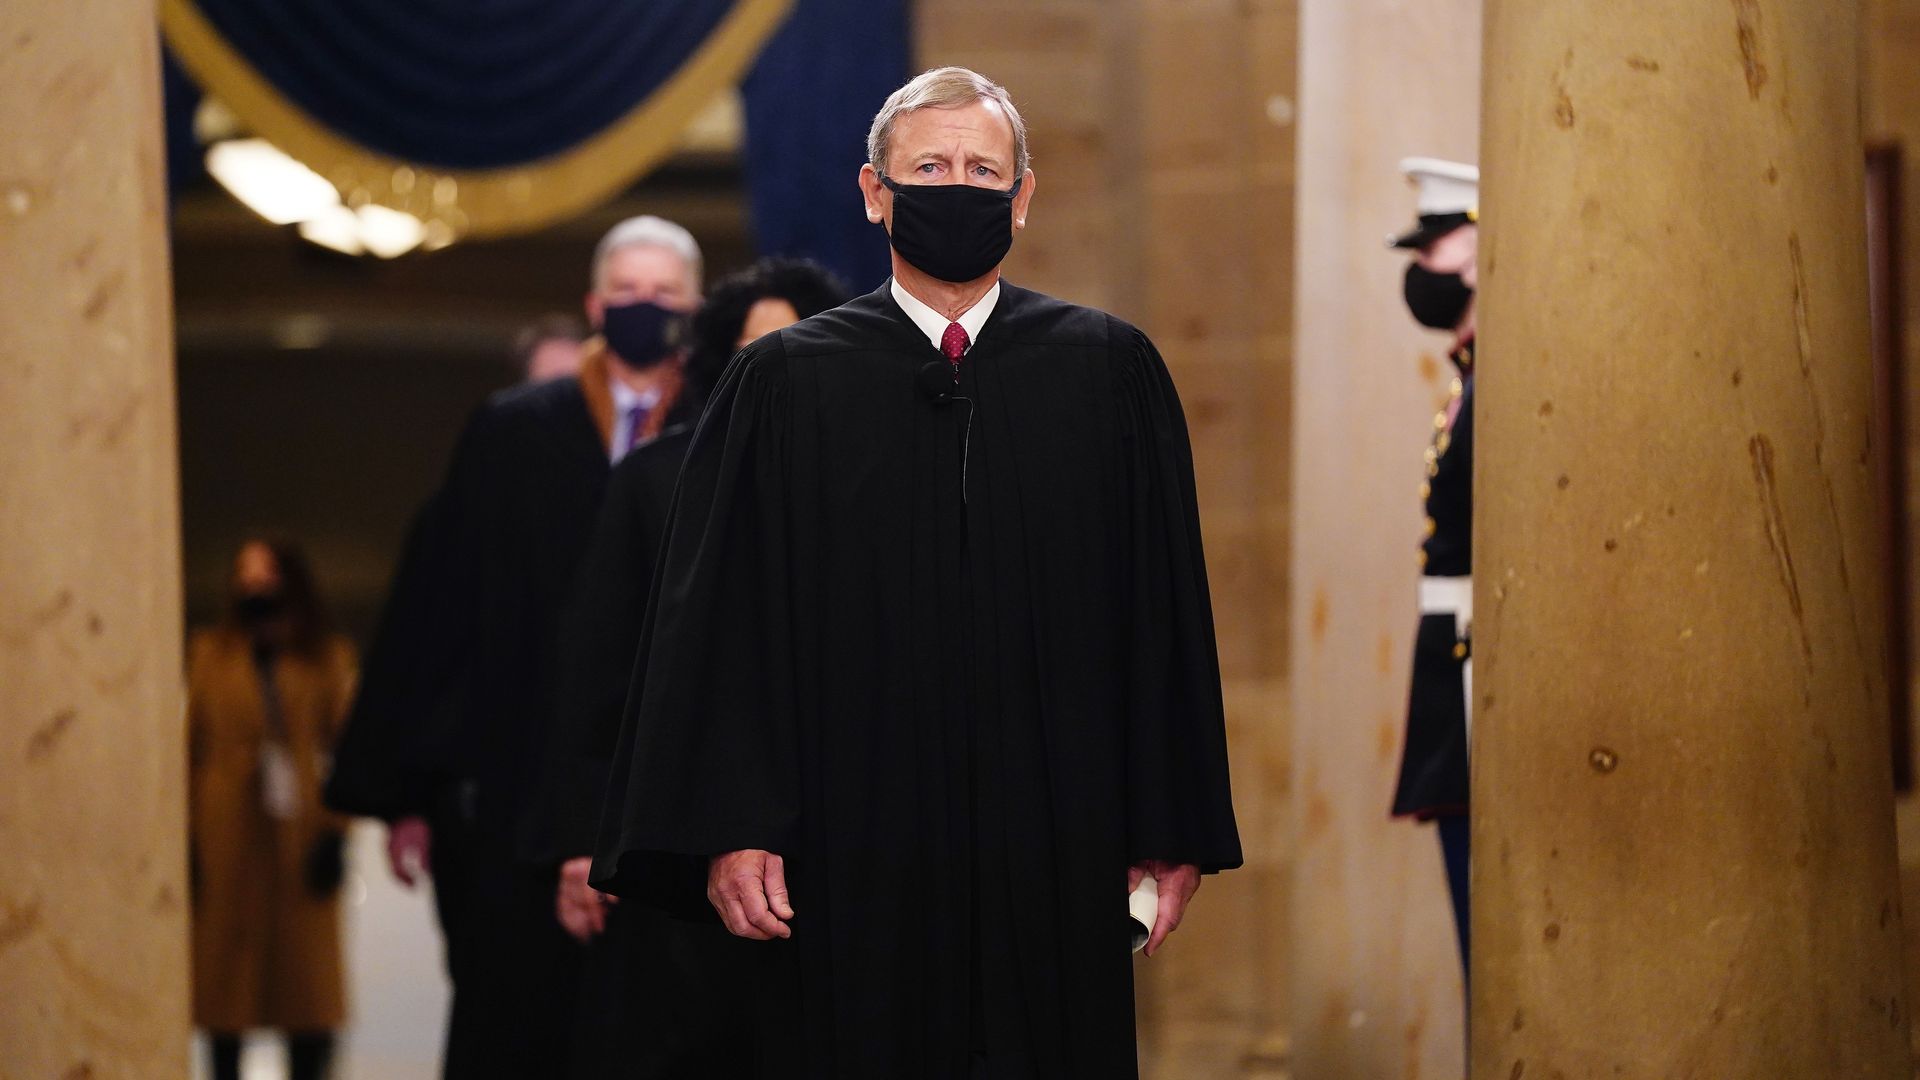 Chief Justice John Roberts in front of Supreme Court justices in Congress on Jan. 20.